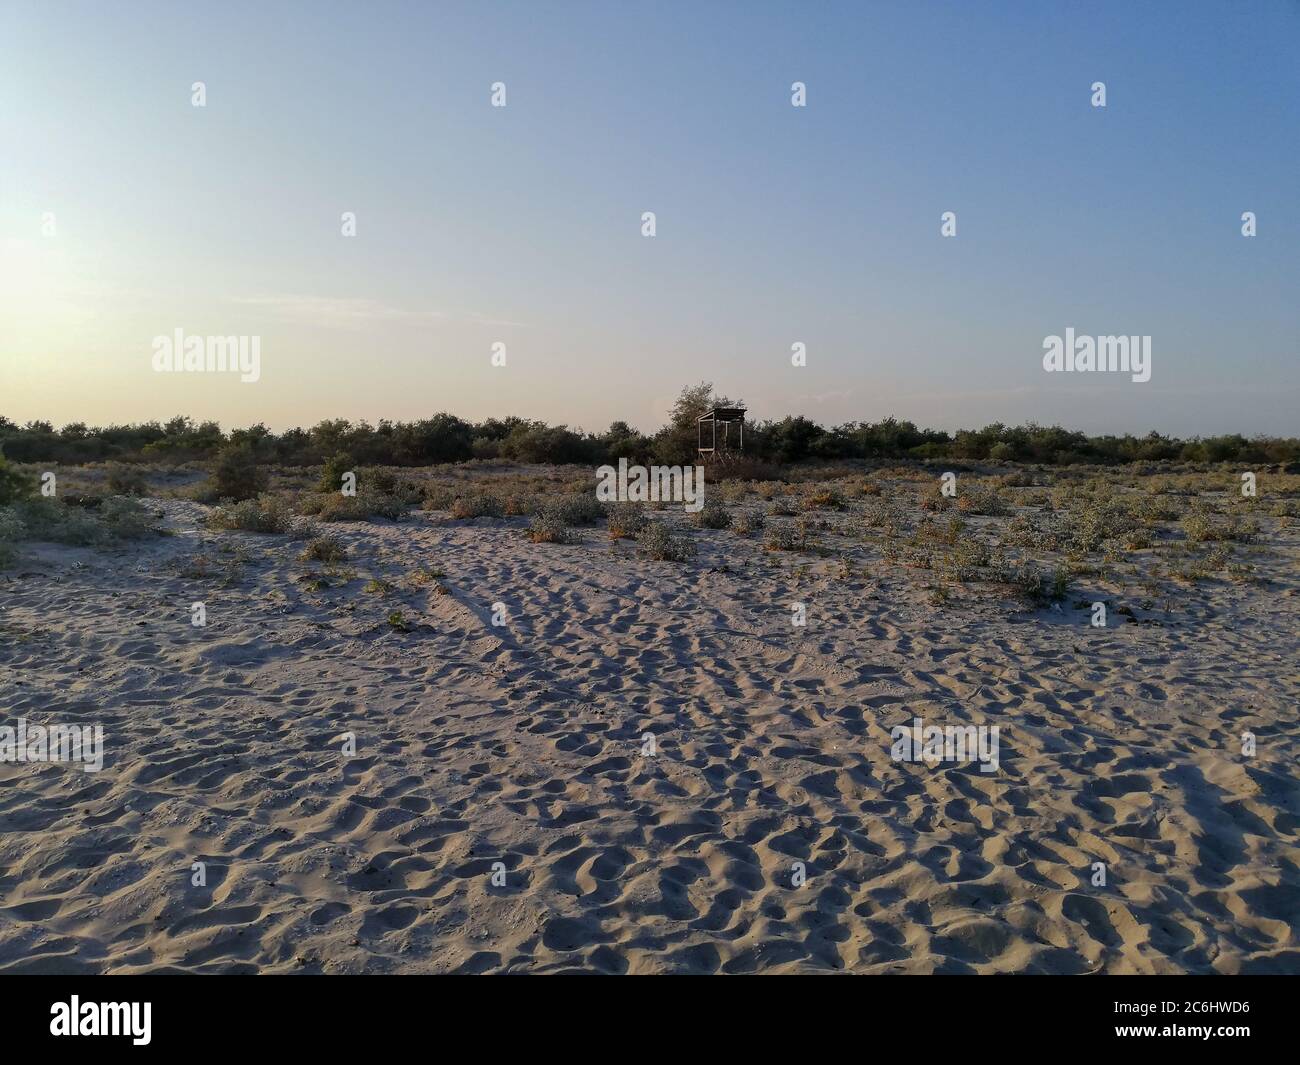 Sulina Beach - the most beautiful wild beach in civilized Romania. Tourists go there for the fine sand and beautiful scenery from the Danube to the Bl Stock Photo